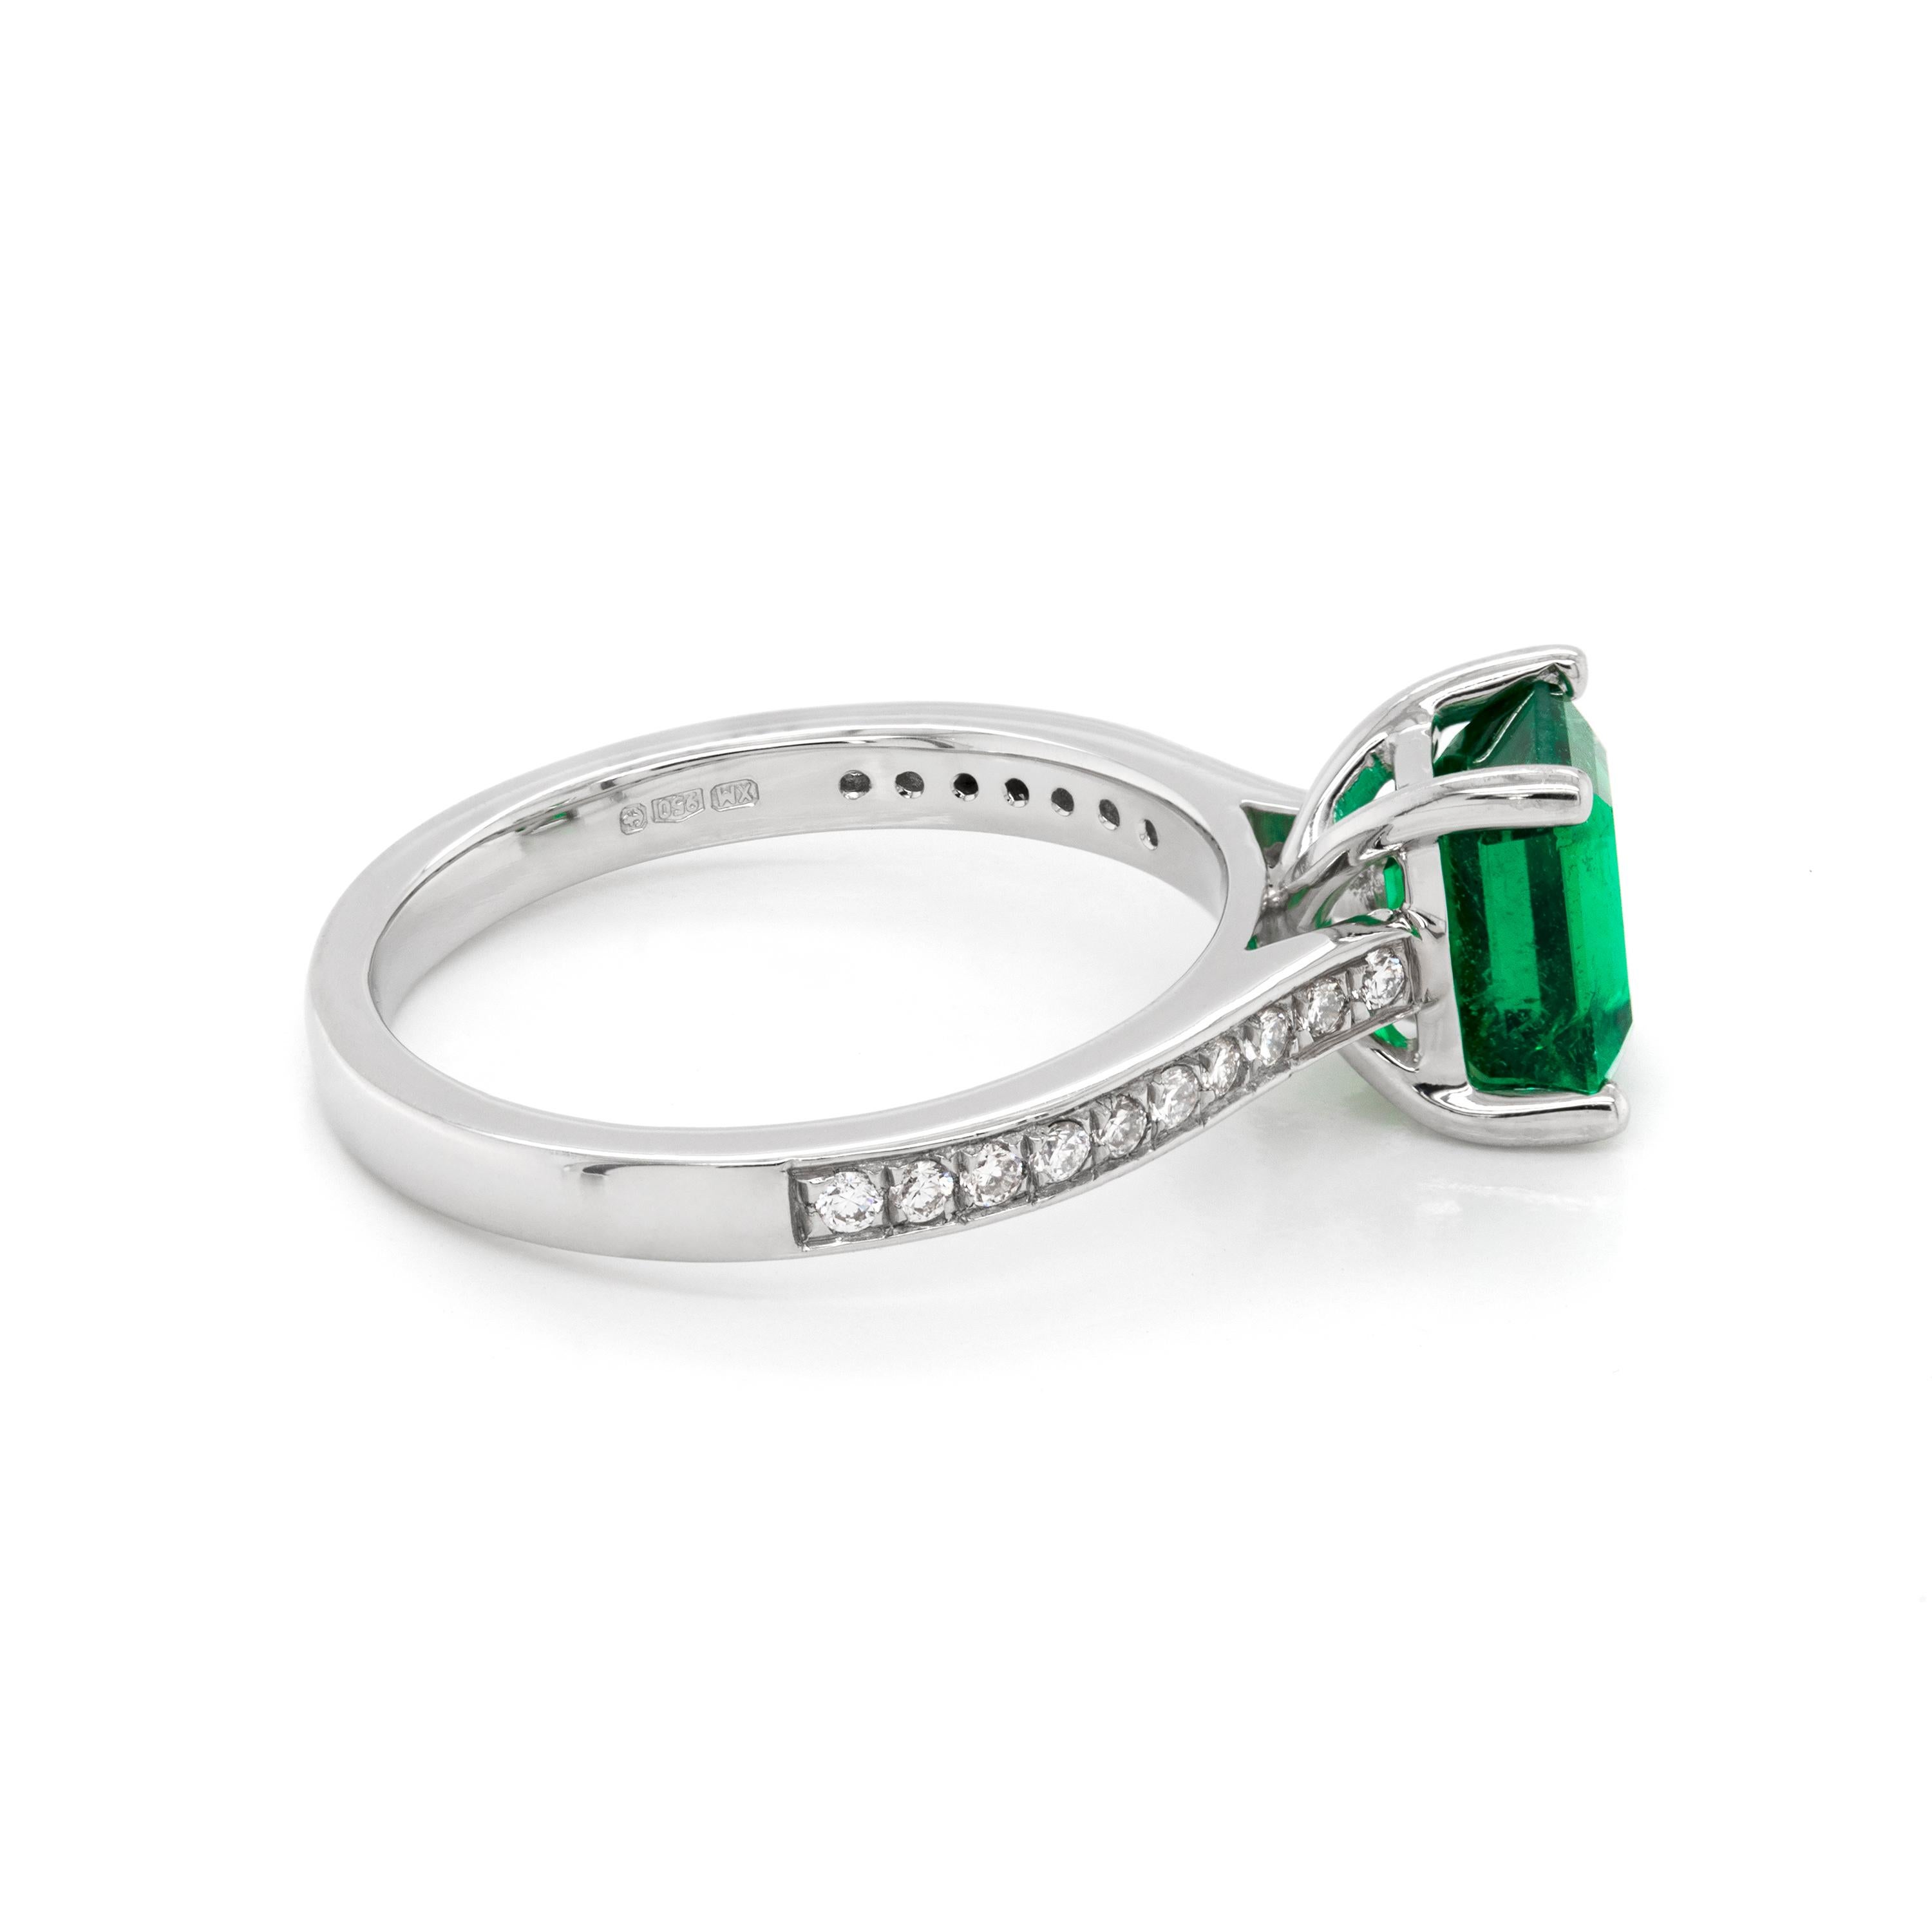 Engagement ring set with a vibrant emerald cut emerald weighing 1.36ct mounted in a four claw, open back setting. The stone is beautifully accompanied by ten round brilliant cut diamonds pavé set on either shoulder weighing a total of 0.15ct, all